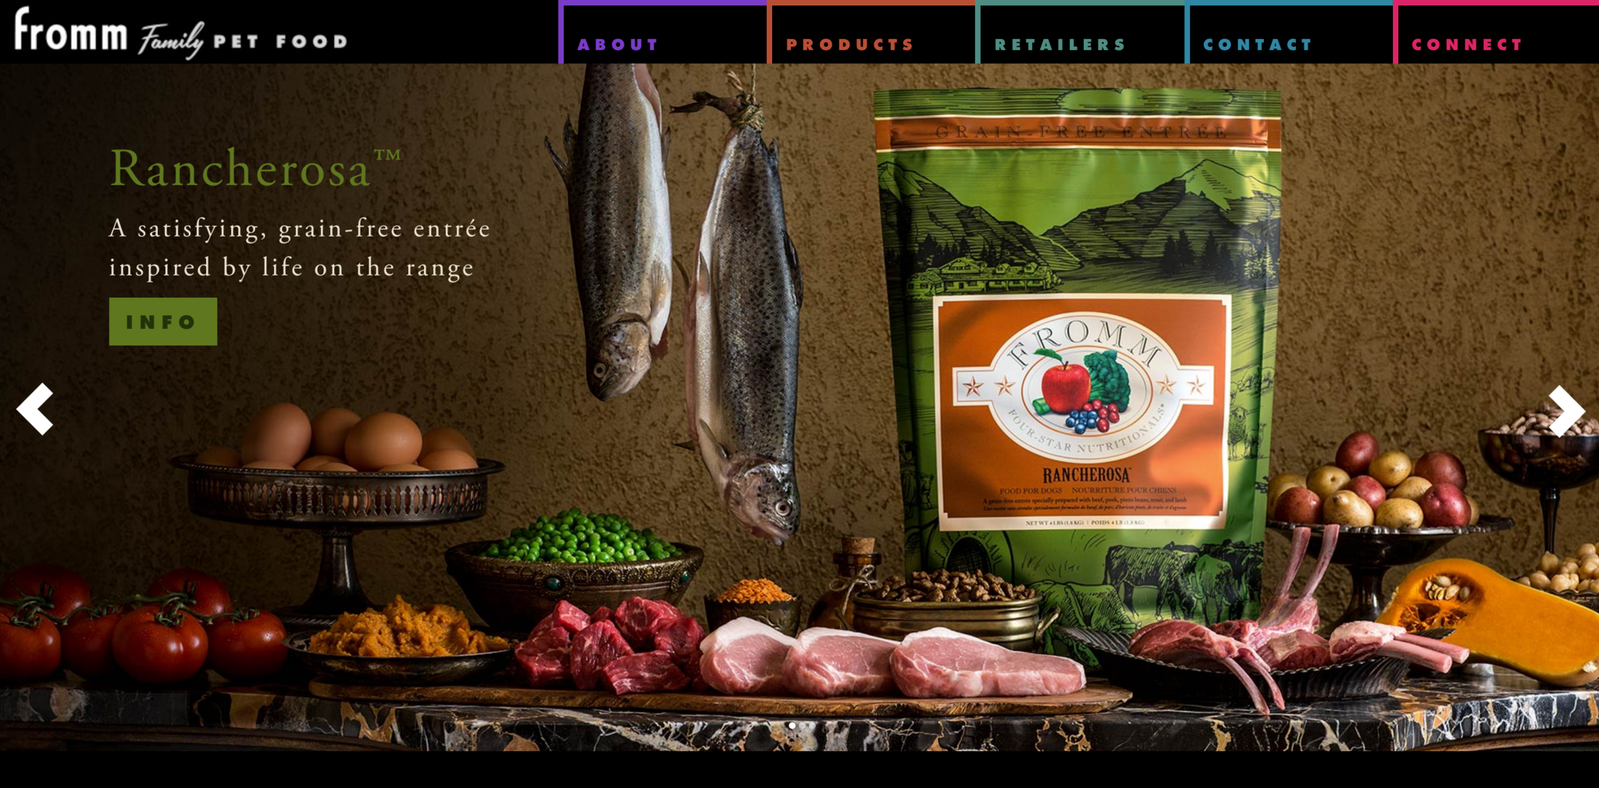 Bag of dog kibble on a buffet with raw meat food photography, produce in bowls, and two fish hanging above the table by the tail.  Website banner for Fromm Family Foods